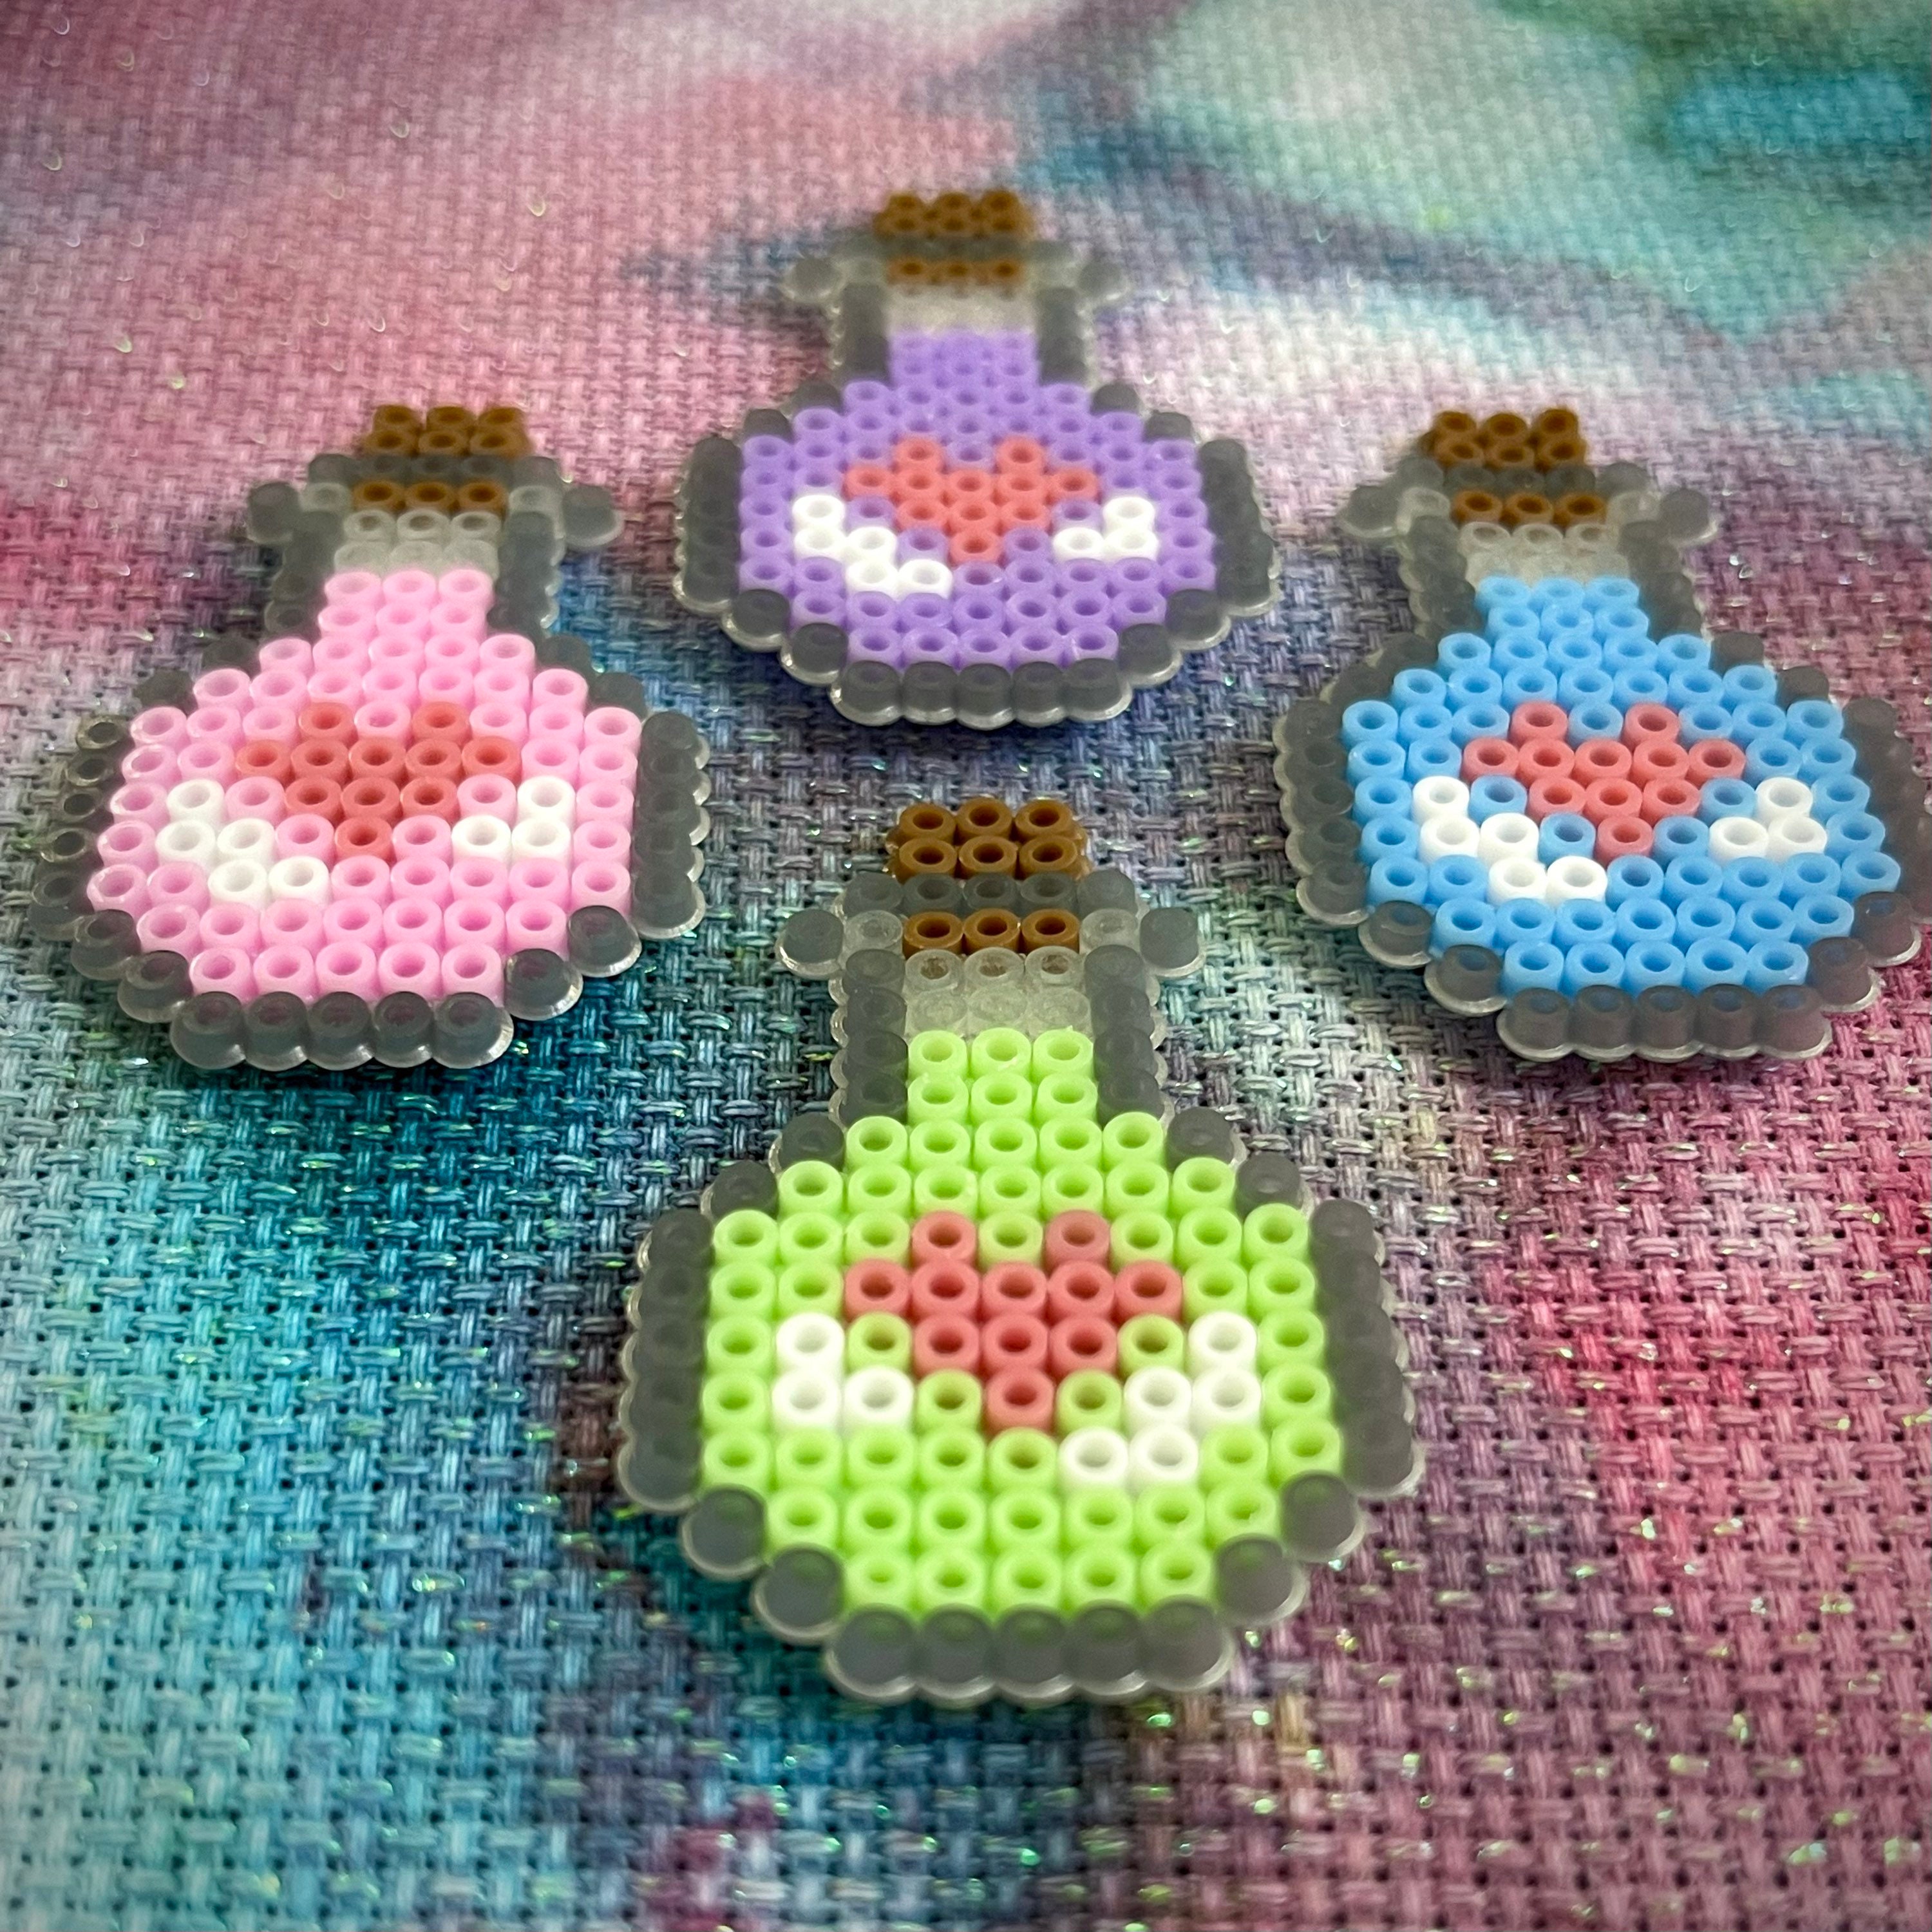 PIC] Started making mini Hama bead needle minders and they're the greatest  minders ever! Why aren't more people making these?! : r/CrossStitch